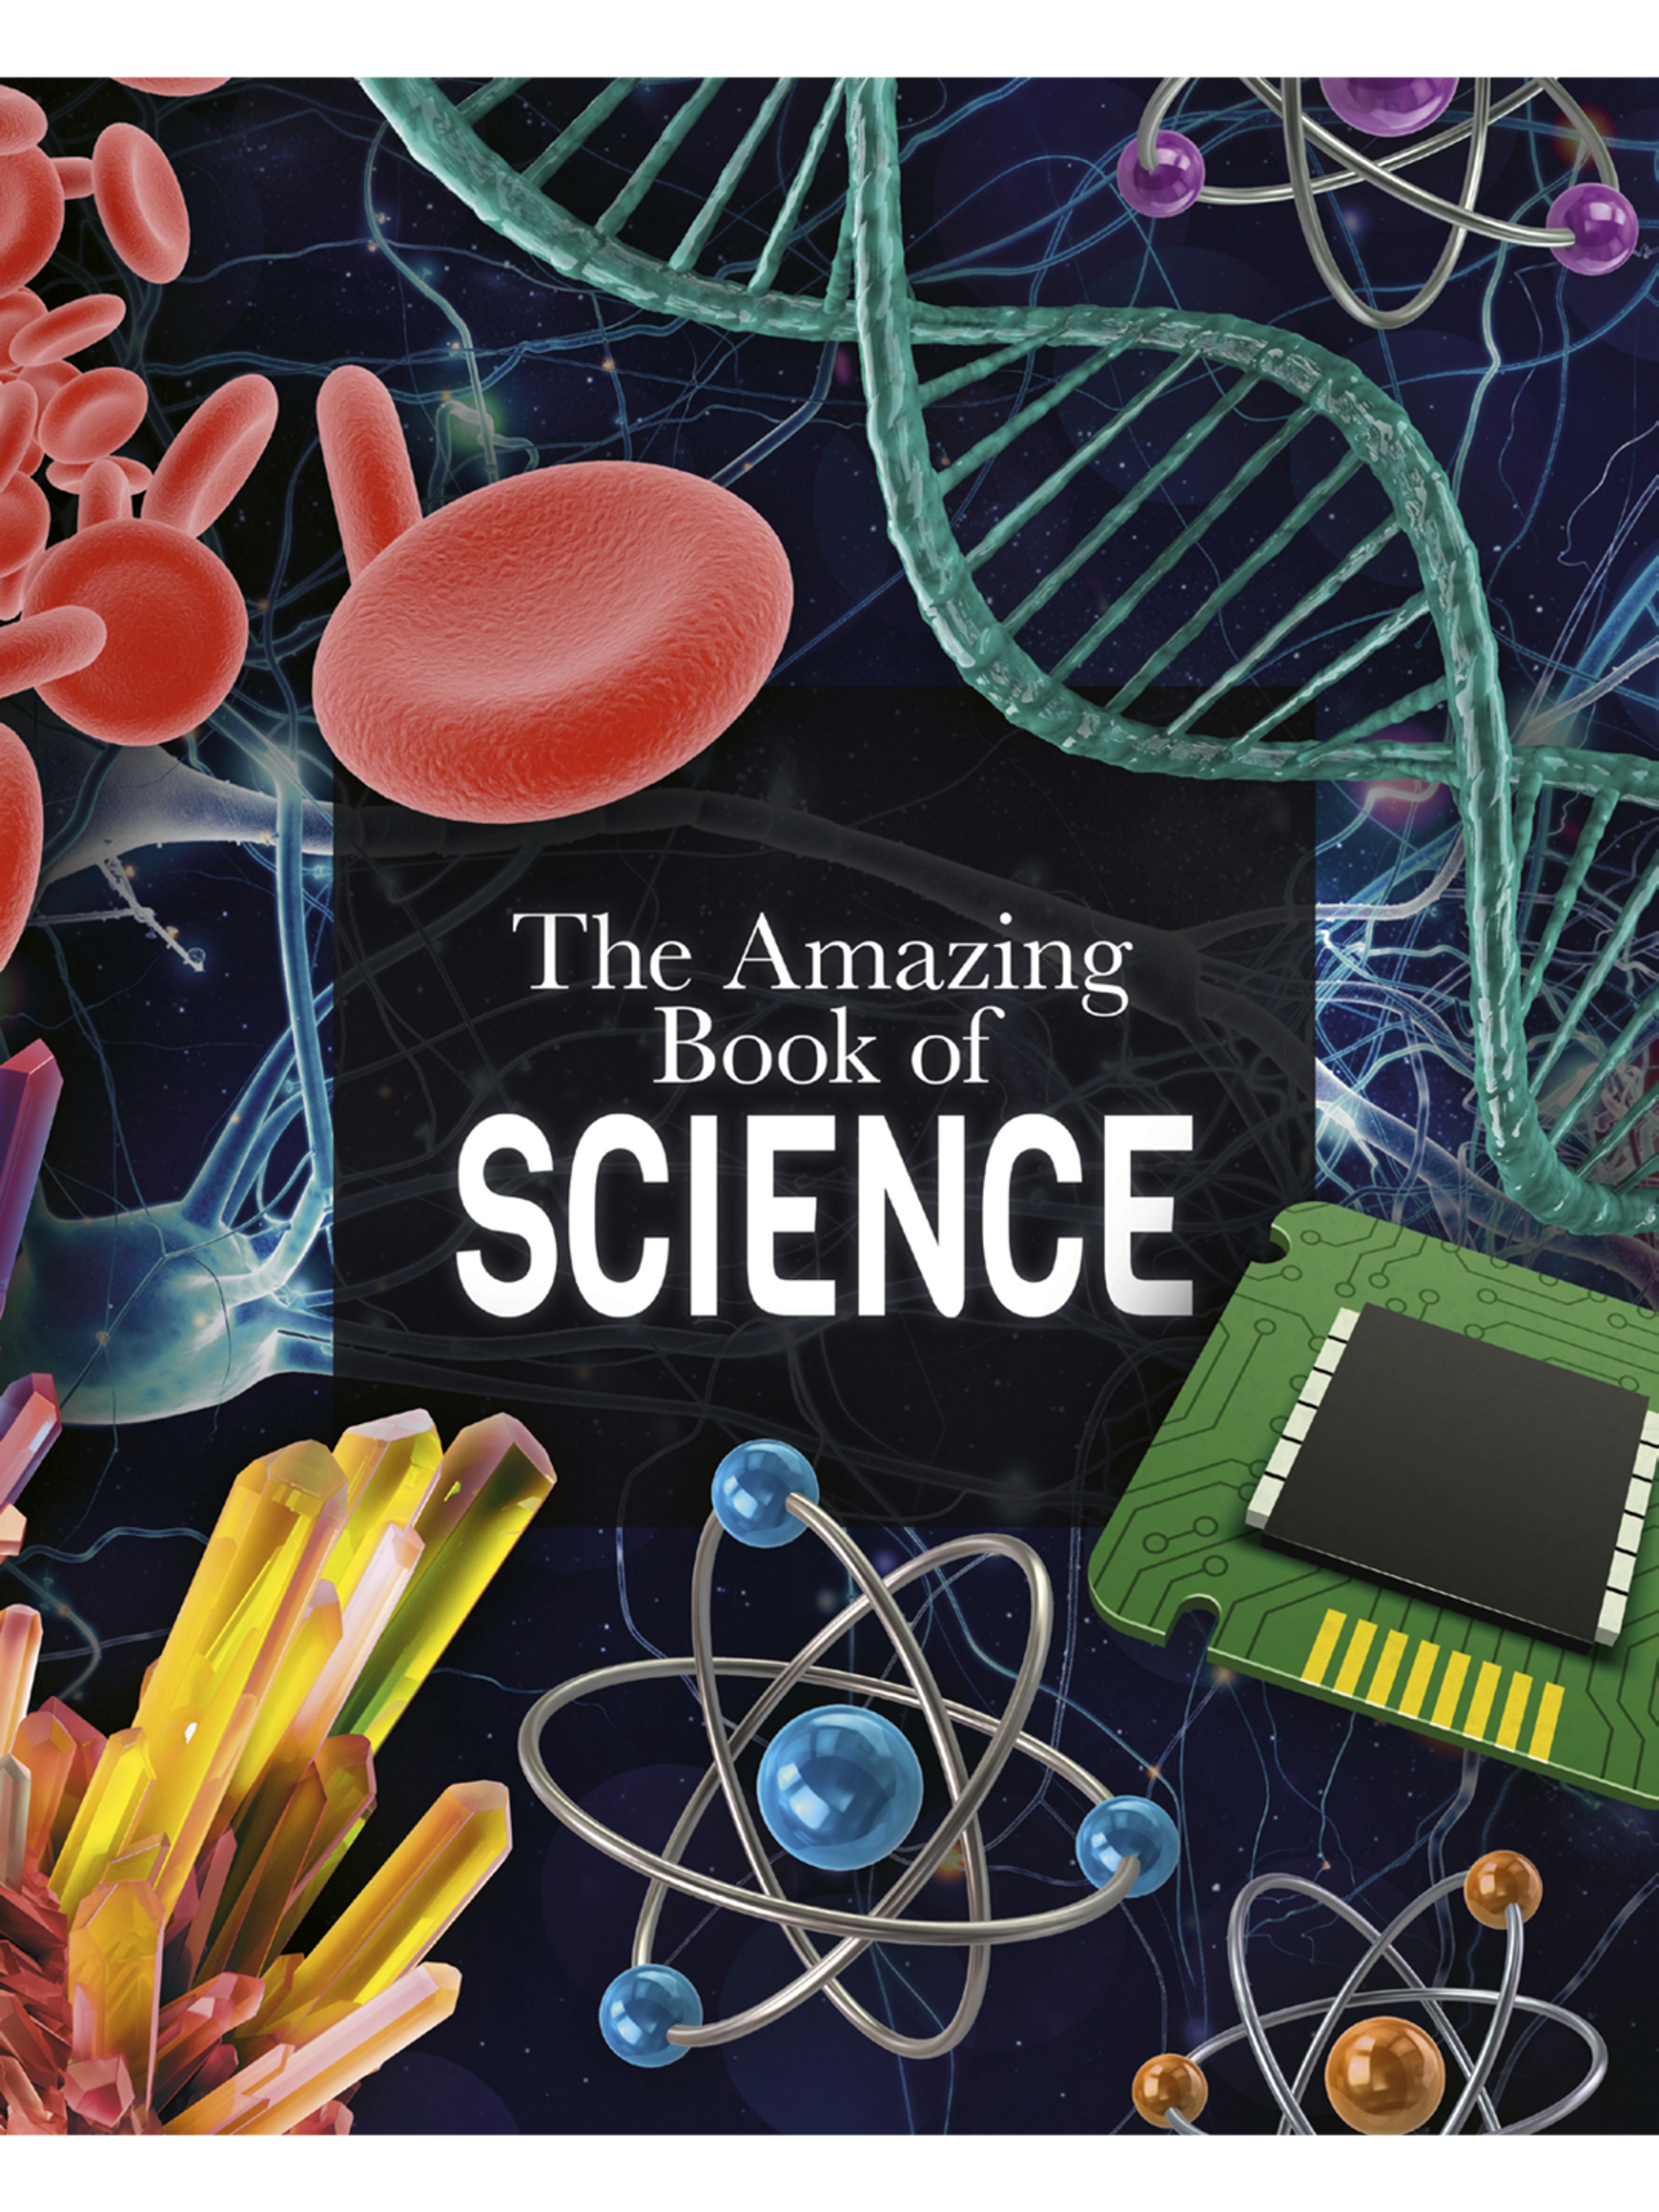 The amazing book of science